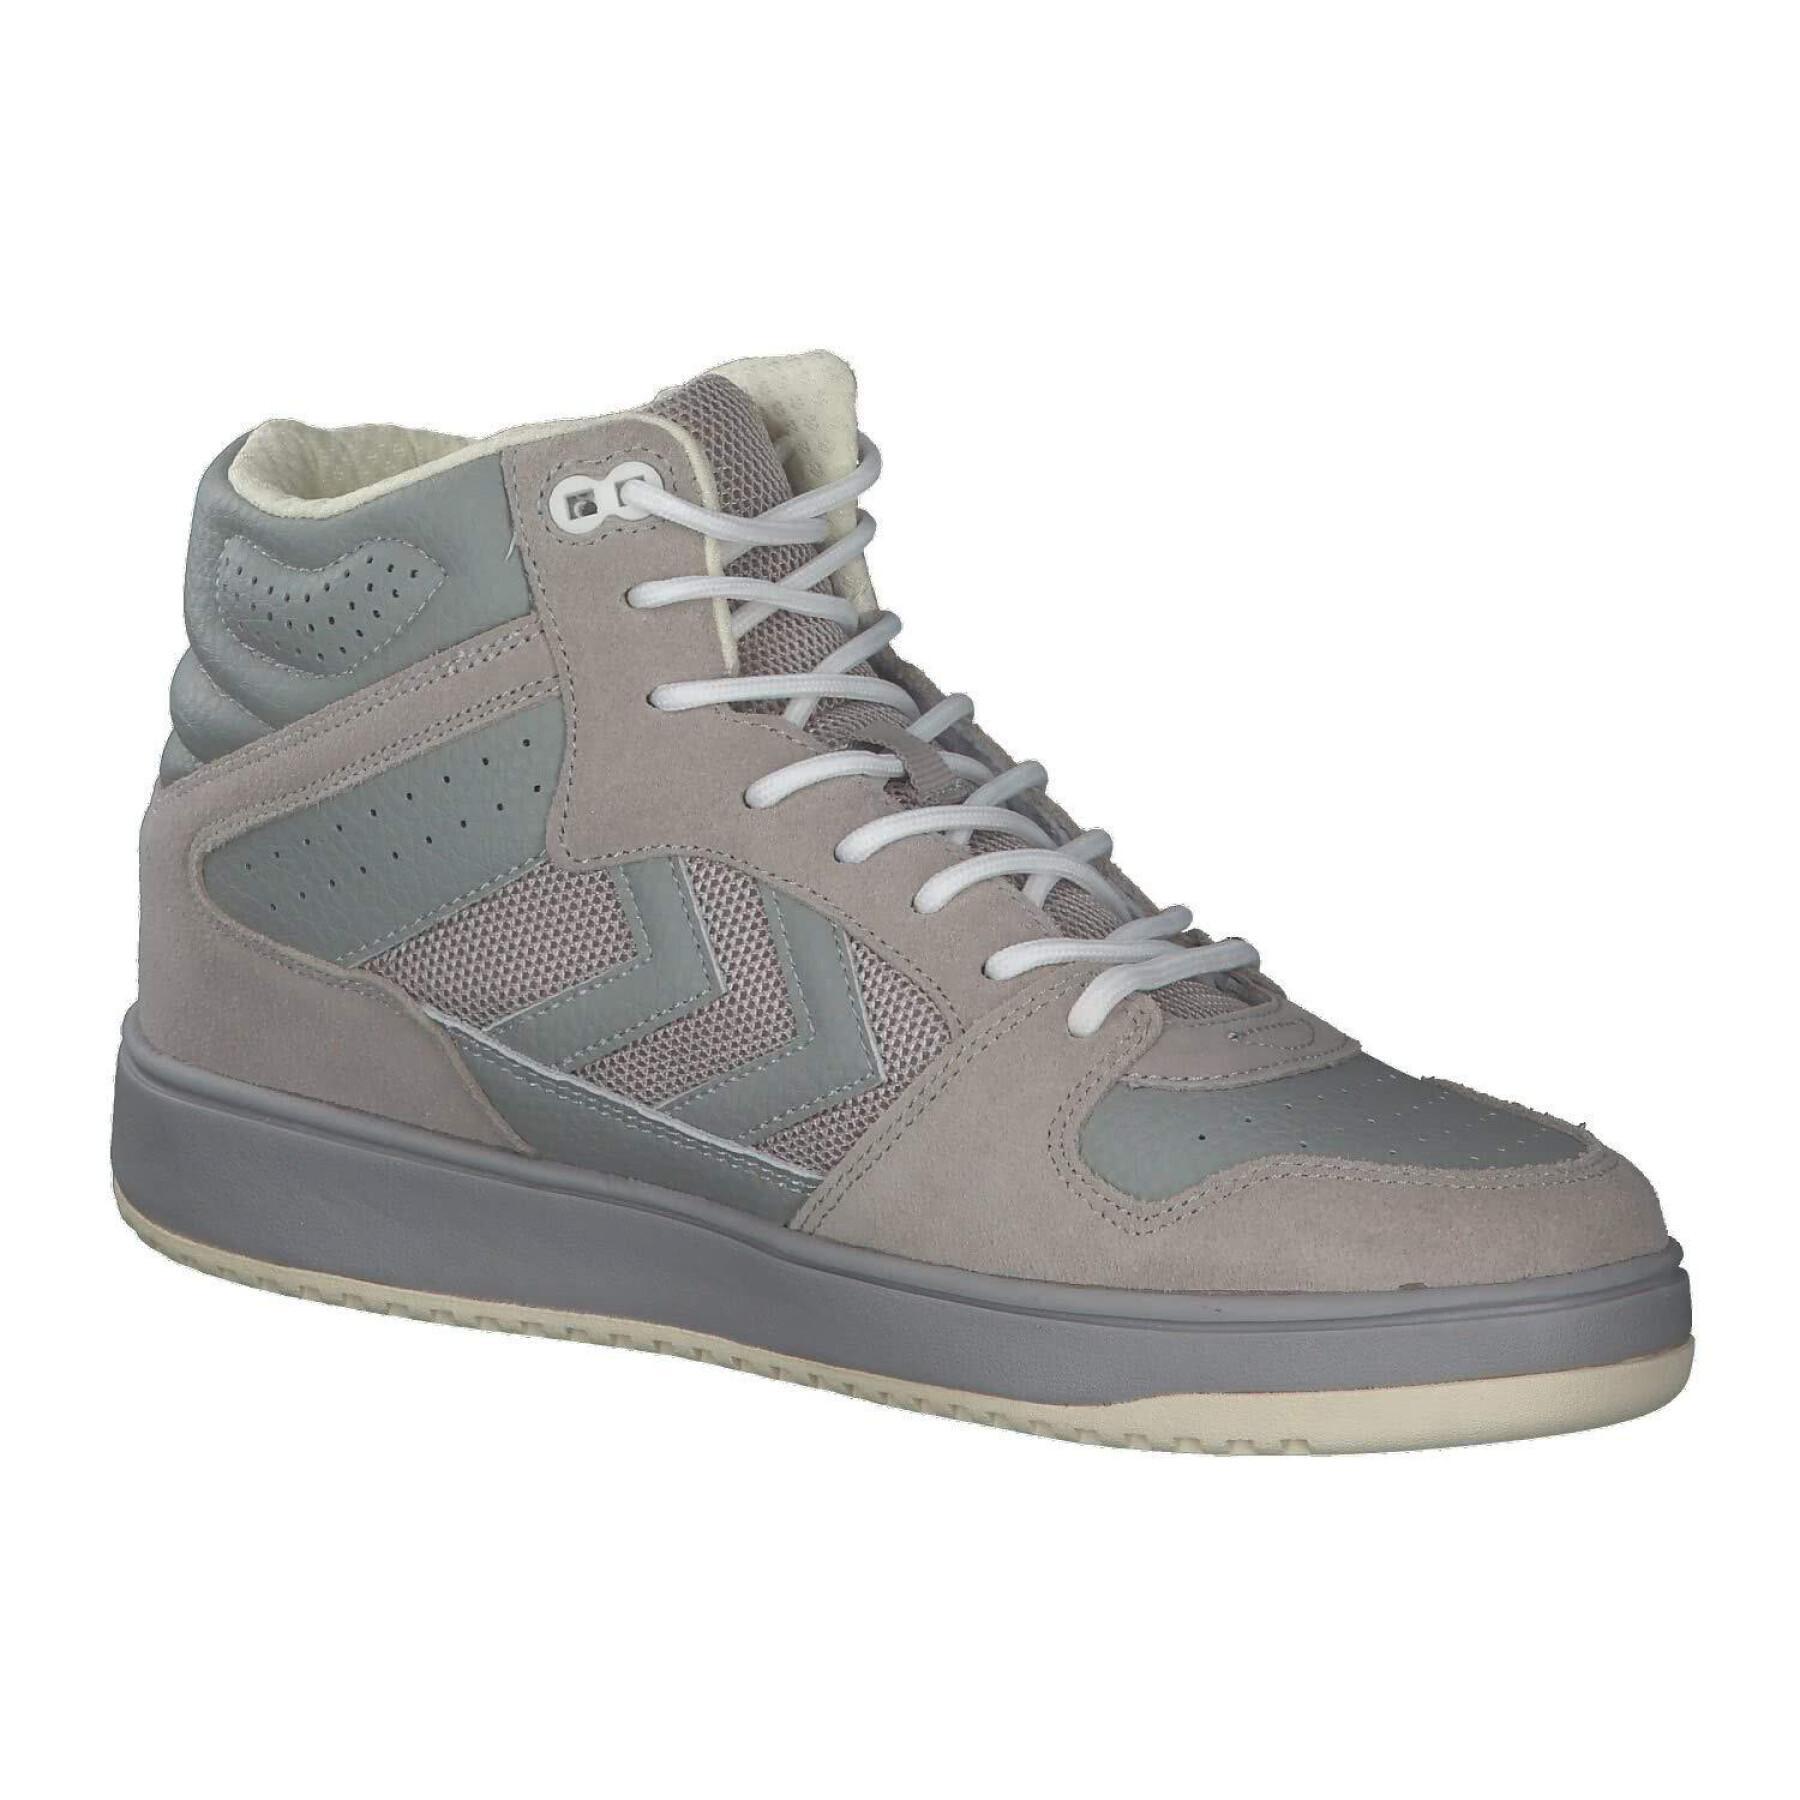 Sneakers Hummel st power play mid